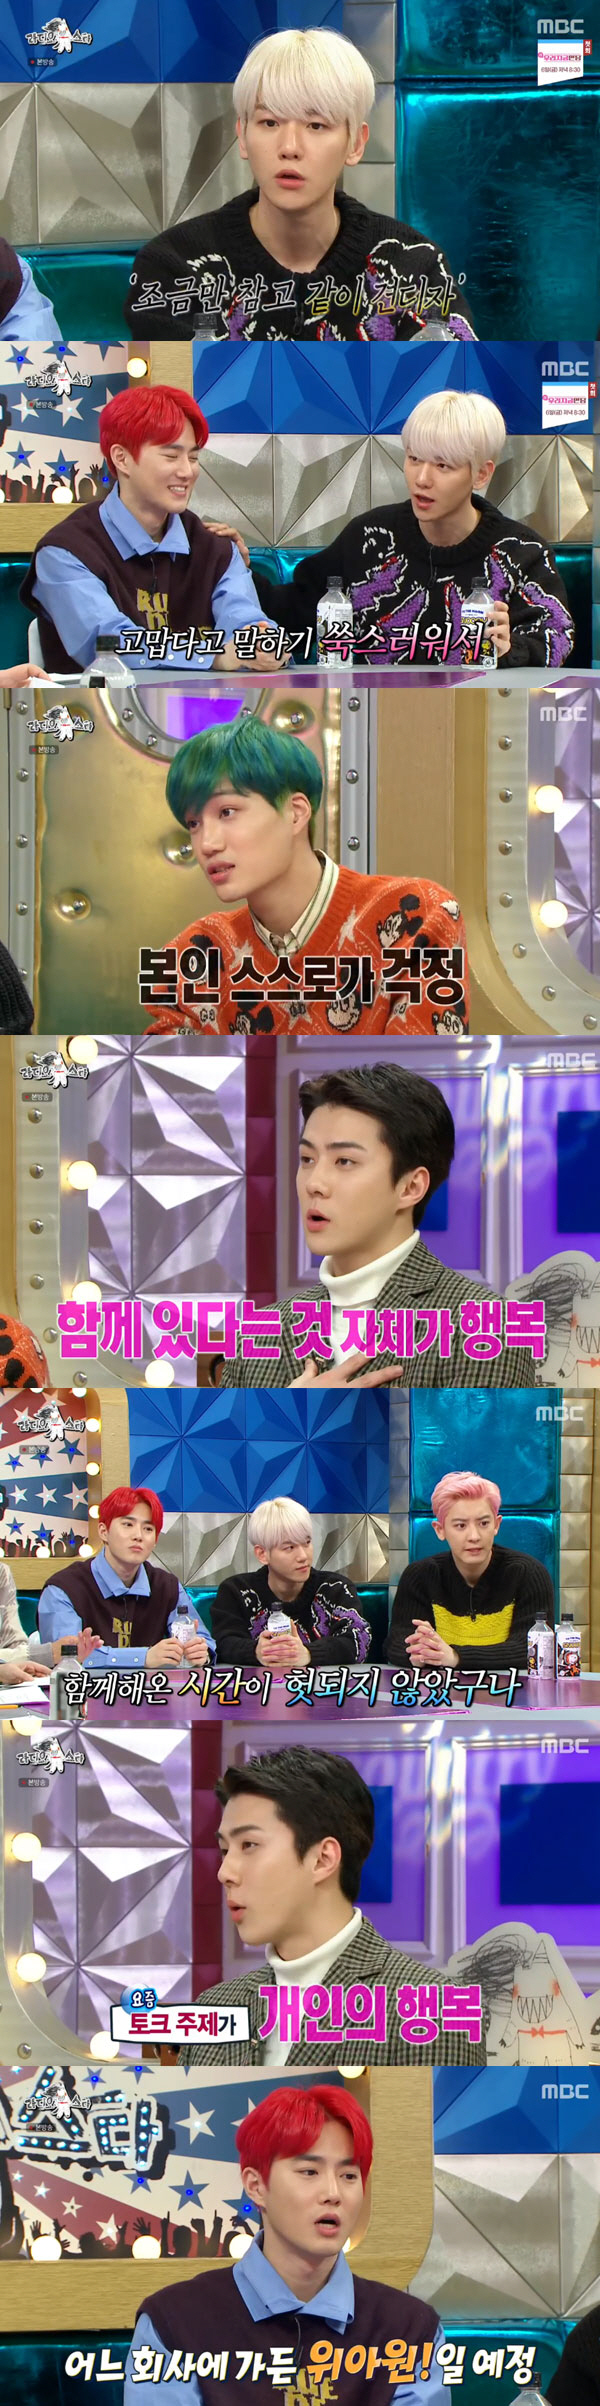 Radio Star was also EXO. The full gesture made the room full of laughter.On MBC Radio Star broadcasted on the 4th, Suho, Chanyeol, Baekhyun, Kai, and Sehun appeared as guests while group EXO Chen appeared as special guests.On this day, Suho showed a radio star that released abs at the same time as the recording began.Chanyeol laughed when he said in a preliminary interview that he was not expecting anything from Chens performance; Chanyeol said: Chen is nice and serious.Rather, I think I will be attacked by the members. When Chen said he was playing a special MC, Suho came to mind, Sehun said. Suho is motivated and passionate.I think there was no jealousy, he said.EXO is a group that has written history of exceeding one million full-length albums in 12 years, and appears in textbooks. Baekhyun has achieved a long dream while doing EXO.When I interviewed him in the past, he said, I want to be a group in textbooks. He said, We are now out.Leader Suho also expressed his sadness at his agency SM. Suho said, When I was growling before, I also took music EXO D.O. overseas, but nowadays it has been reduced.Were called minimalism. I went to a concert abroad a while ago, and I gave him a suite if I was a leader.Chanyeol said, When I go to a hotel, I rent a floor for the safety of the members. Suho type used it as a room for gathering suites, but nowadays I was in a narrow room.The youngest Sehun feels aging these days, Sehun said: I talk about hangovers. When I relieve stress, I feel better and I find them.In the old days, kites were possible, but the fortress should be abandoned the next day if Haru was drunk. At this time, Chanyeol said, EXO D.O. took a vacation a while ago.I didnt plan to meet him, but Sehun called the Pressurized water reactor and said, Brother, Im out. Youre going to go, right?I went, he said. Suddenly, Sehun came to me as if I would join him late. He said, I did not hear from him.I was ready to run the fourth time as it felt, he said. It was about 10 oclock, so it was discharged. Chanyeol had a vocal cord surgery in June this year and performed a silent performance; he said, I had a vocal cord surgery on June 15; I first had a problem with the problem, but I did not improve.I was unable to speak for a month after surgery because a cyst was found in a close examination. I have lived a lot of Haru Haru, and I have a lot of bad ideas when I think, Why did you overwork me? So I avoided the depression.From then on, I started reading books with an open mind. EXO members have also been honest about their income. Suho said, We talk about each other earning a lot. People who earn a lot live.I have sold more than 500,000 solo albums. I live hard in musicals, movies, etc. Chanyeol was a financial king. I have a pension, a subscription, Chanyeol said. I became a landlord two months ago.Sehun said he would send coffee tea to the drama set, said the youngest Sehun, a righteous man. Five coffee teas came, I was impressed and took a video.Chanyeol also recently revealed the story that was impressed by EXO D.O.Chanyeol said, When I was performing silent for a month, I had a lot of Pressurized water reactors.I can not even say it, but I came to my cell phone and did it. Chanyeol also confessed that he had a physical fight with EXO D.O.; he said, Pressurized water reactors do a good job of toxic jujitsu.Pressurized water reactor says, I cant untie a choke. So I hung a choke, and I couldnt breathe.I was not able to see the consciousness, but I was stuck because of my pride. For a while, the string of reason was cut off and the superhuman power came out and I was overtaken by the Pressurized water reactor.Then the ankle of the Pressurized water reactor went back: the Pressurized water reactor failed to walk for two months, he said.Sehun became a close friend of Lee Seung Gi through Netflix The Beginner is You 2.Sehun said, I was surprised to hear that the next day after the recording, I had seven bottles of alcohol.Leader Suho also takes a lot of mental health from the members. Suho said, Baekhyun was having a hard time flying when he was performing overseas concerts as a super M.It was called, he said, and he laughed.Kai cited himself as a bad member of Mental, who said: Self is affected by evil, Mental is bad, so I try to avoid and not see evil in the first place.I have a lot of rebooks and regrets, he said. I try to fix a lot in that part. Sehun expressed his affection for the members, who said, Thanks to the members, I have overcome the hard times, and I am happy to be with the members.The time weve been together has not been wasted. It has been healed by itself.EXO. Suho, who has been running for the time being, said, Members talk about renewal, he said. We have four years left, including whether we were in SM, making other labels, and military service.Im thinking with some room, he said frankly.